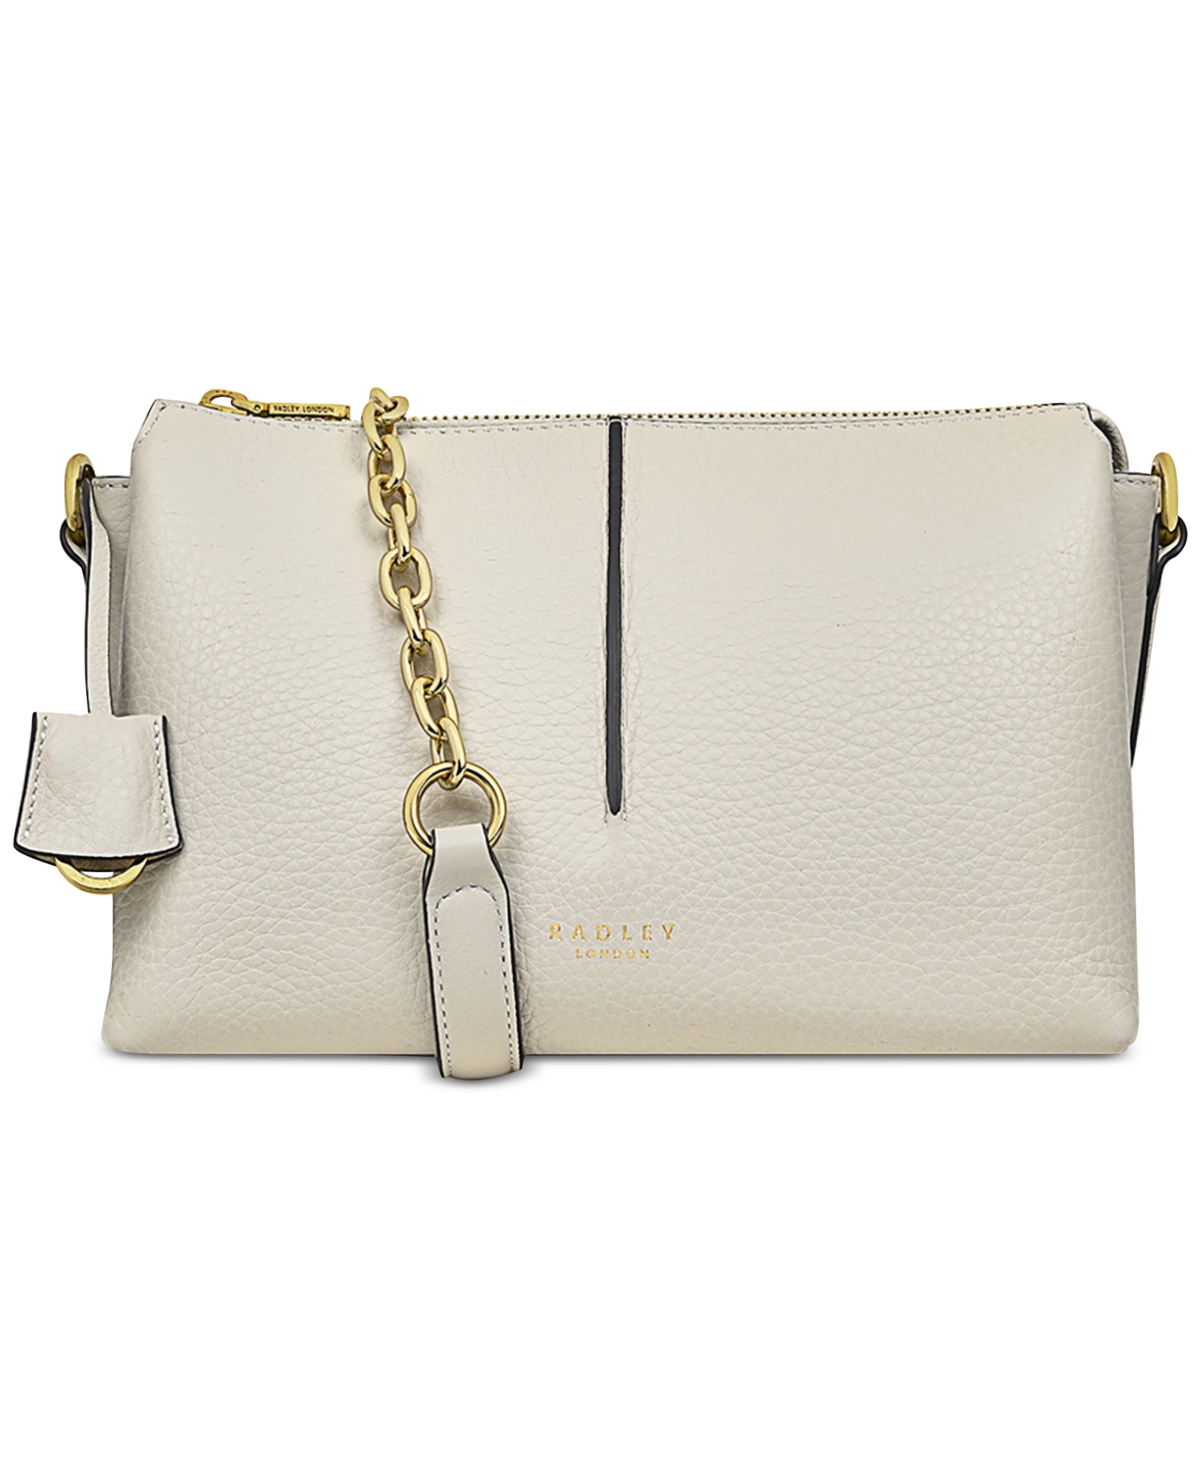 Asian expansion in the bag for resurgent Radley